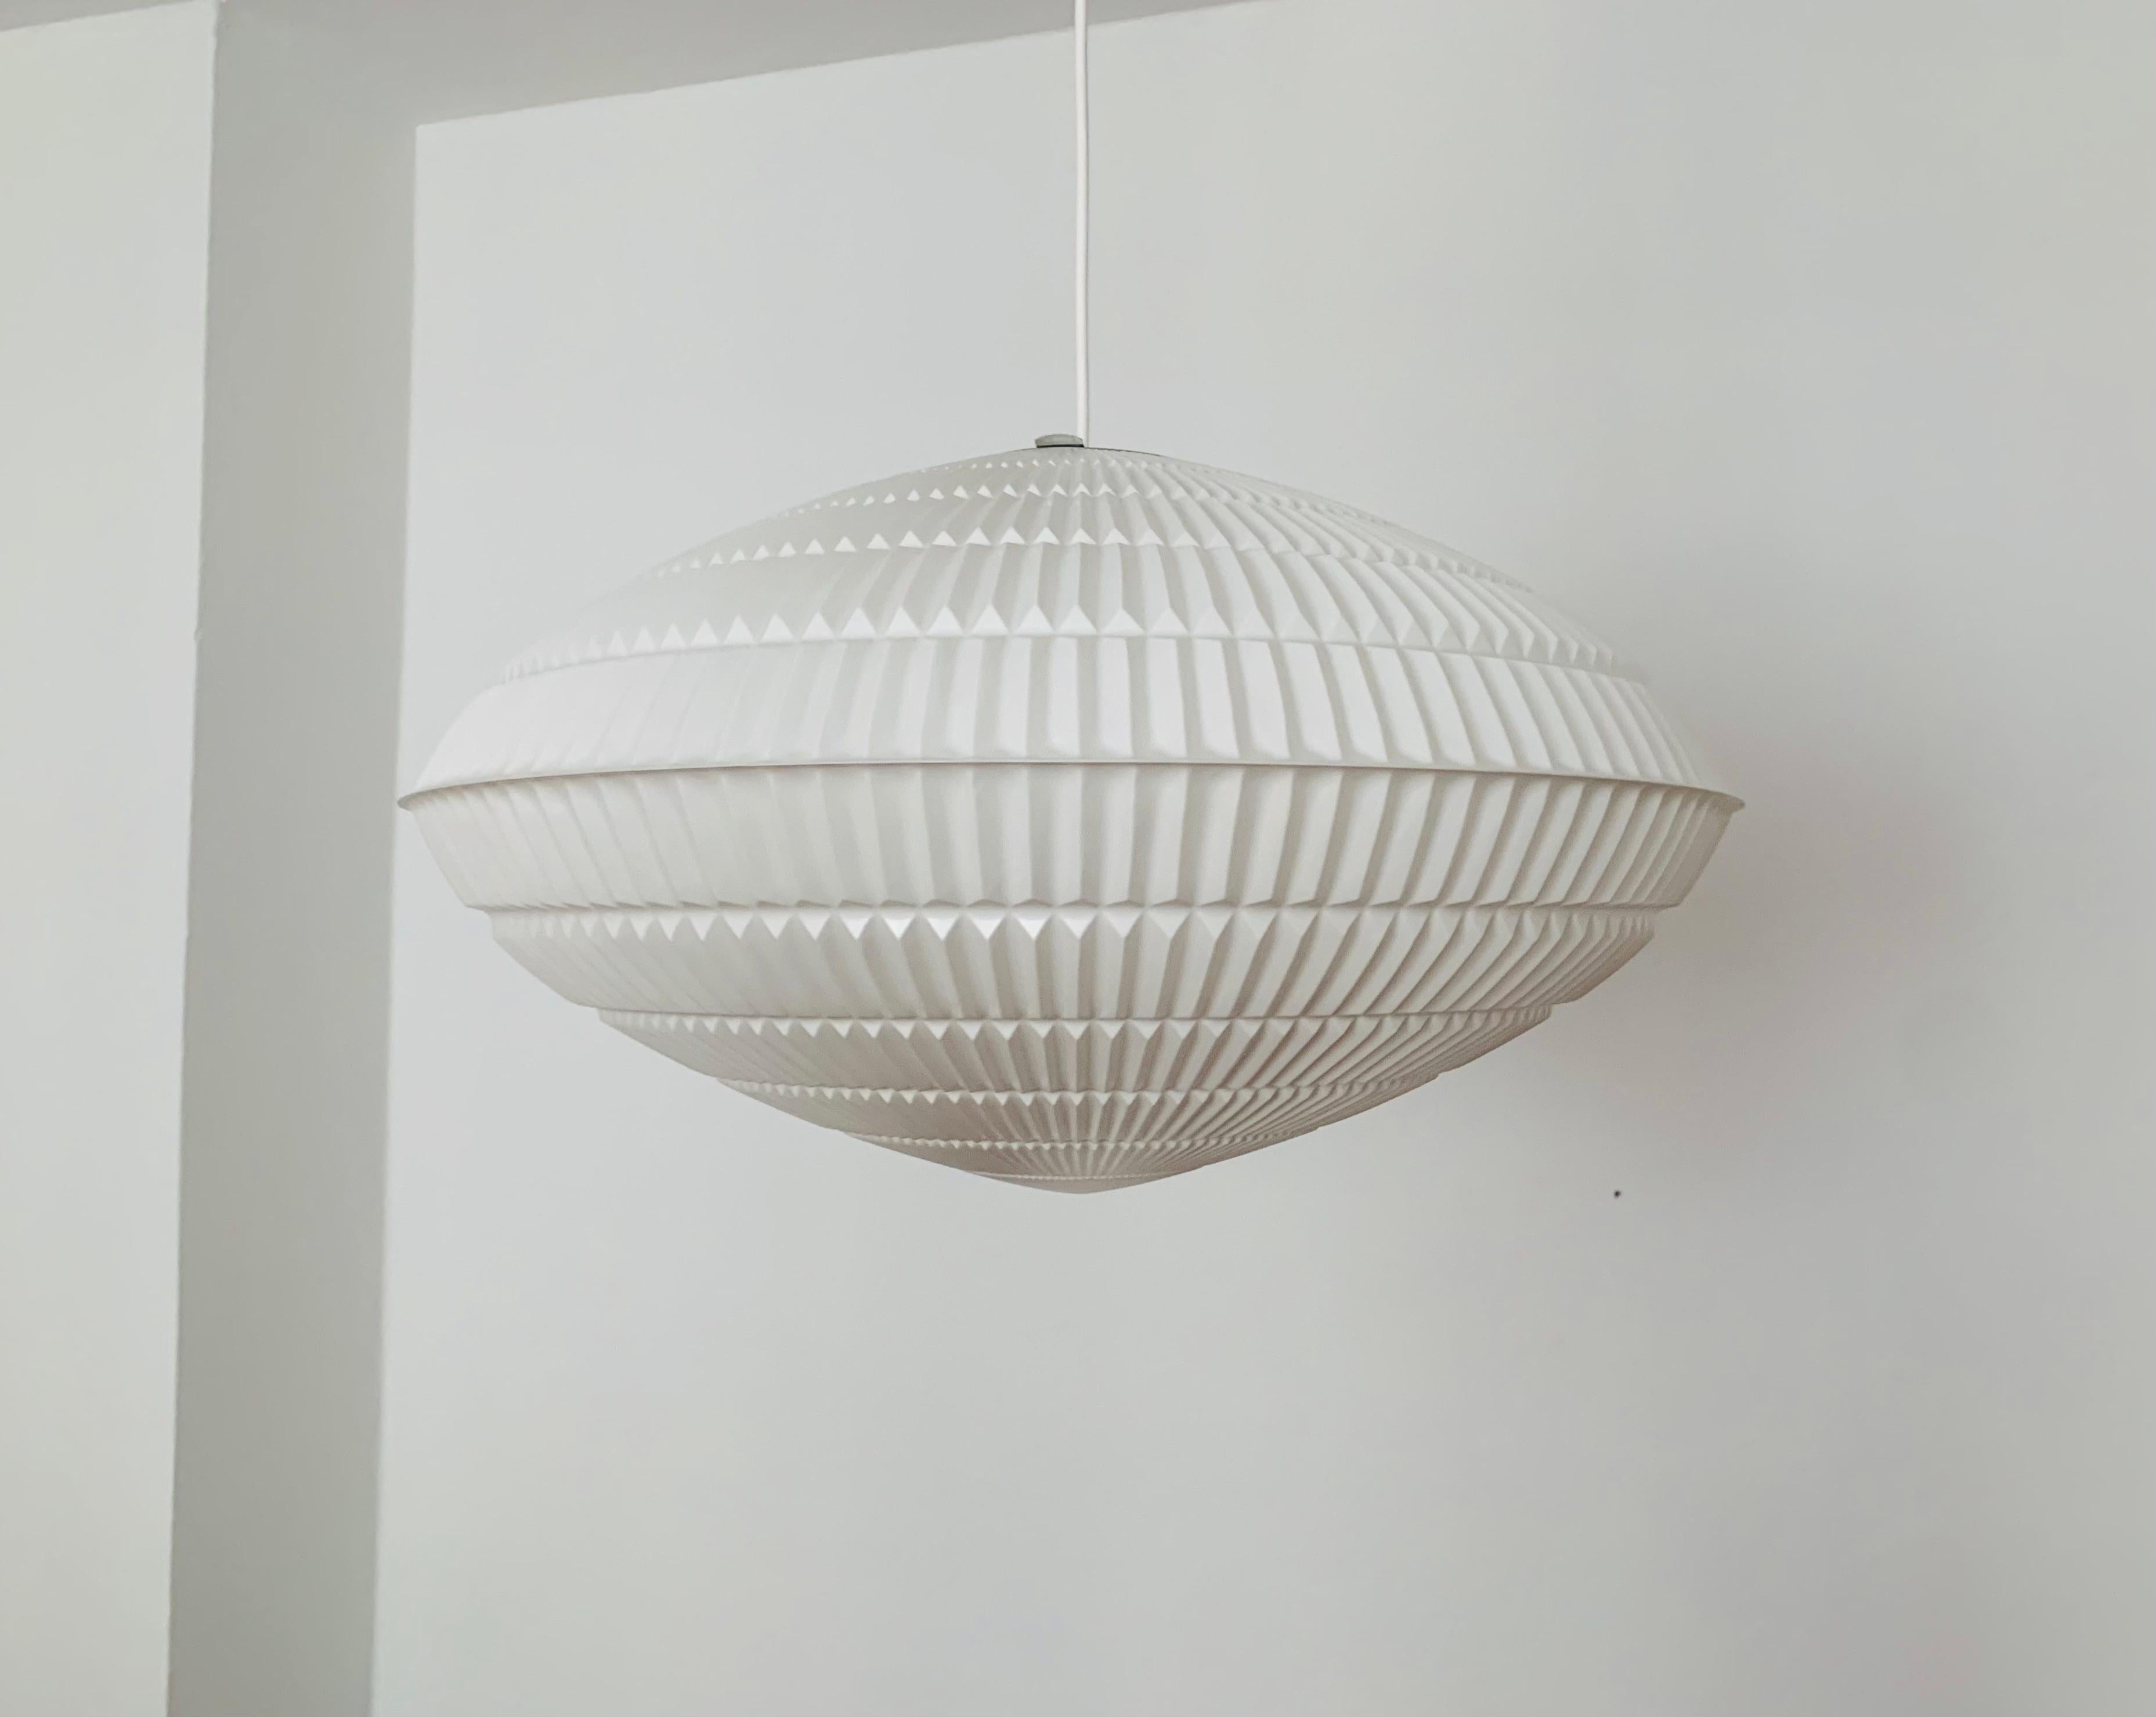 Very nice pendant lamp from the 1960s.
Wonderful and contemporary design.
A highlight for every room.

Manufacturer: Erco
Design: Aloys Gangkofner

Condition:

Very good vintage condition with minimal signs of wear consistent with age.

The pictures